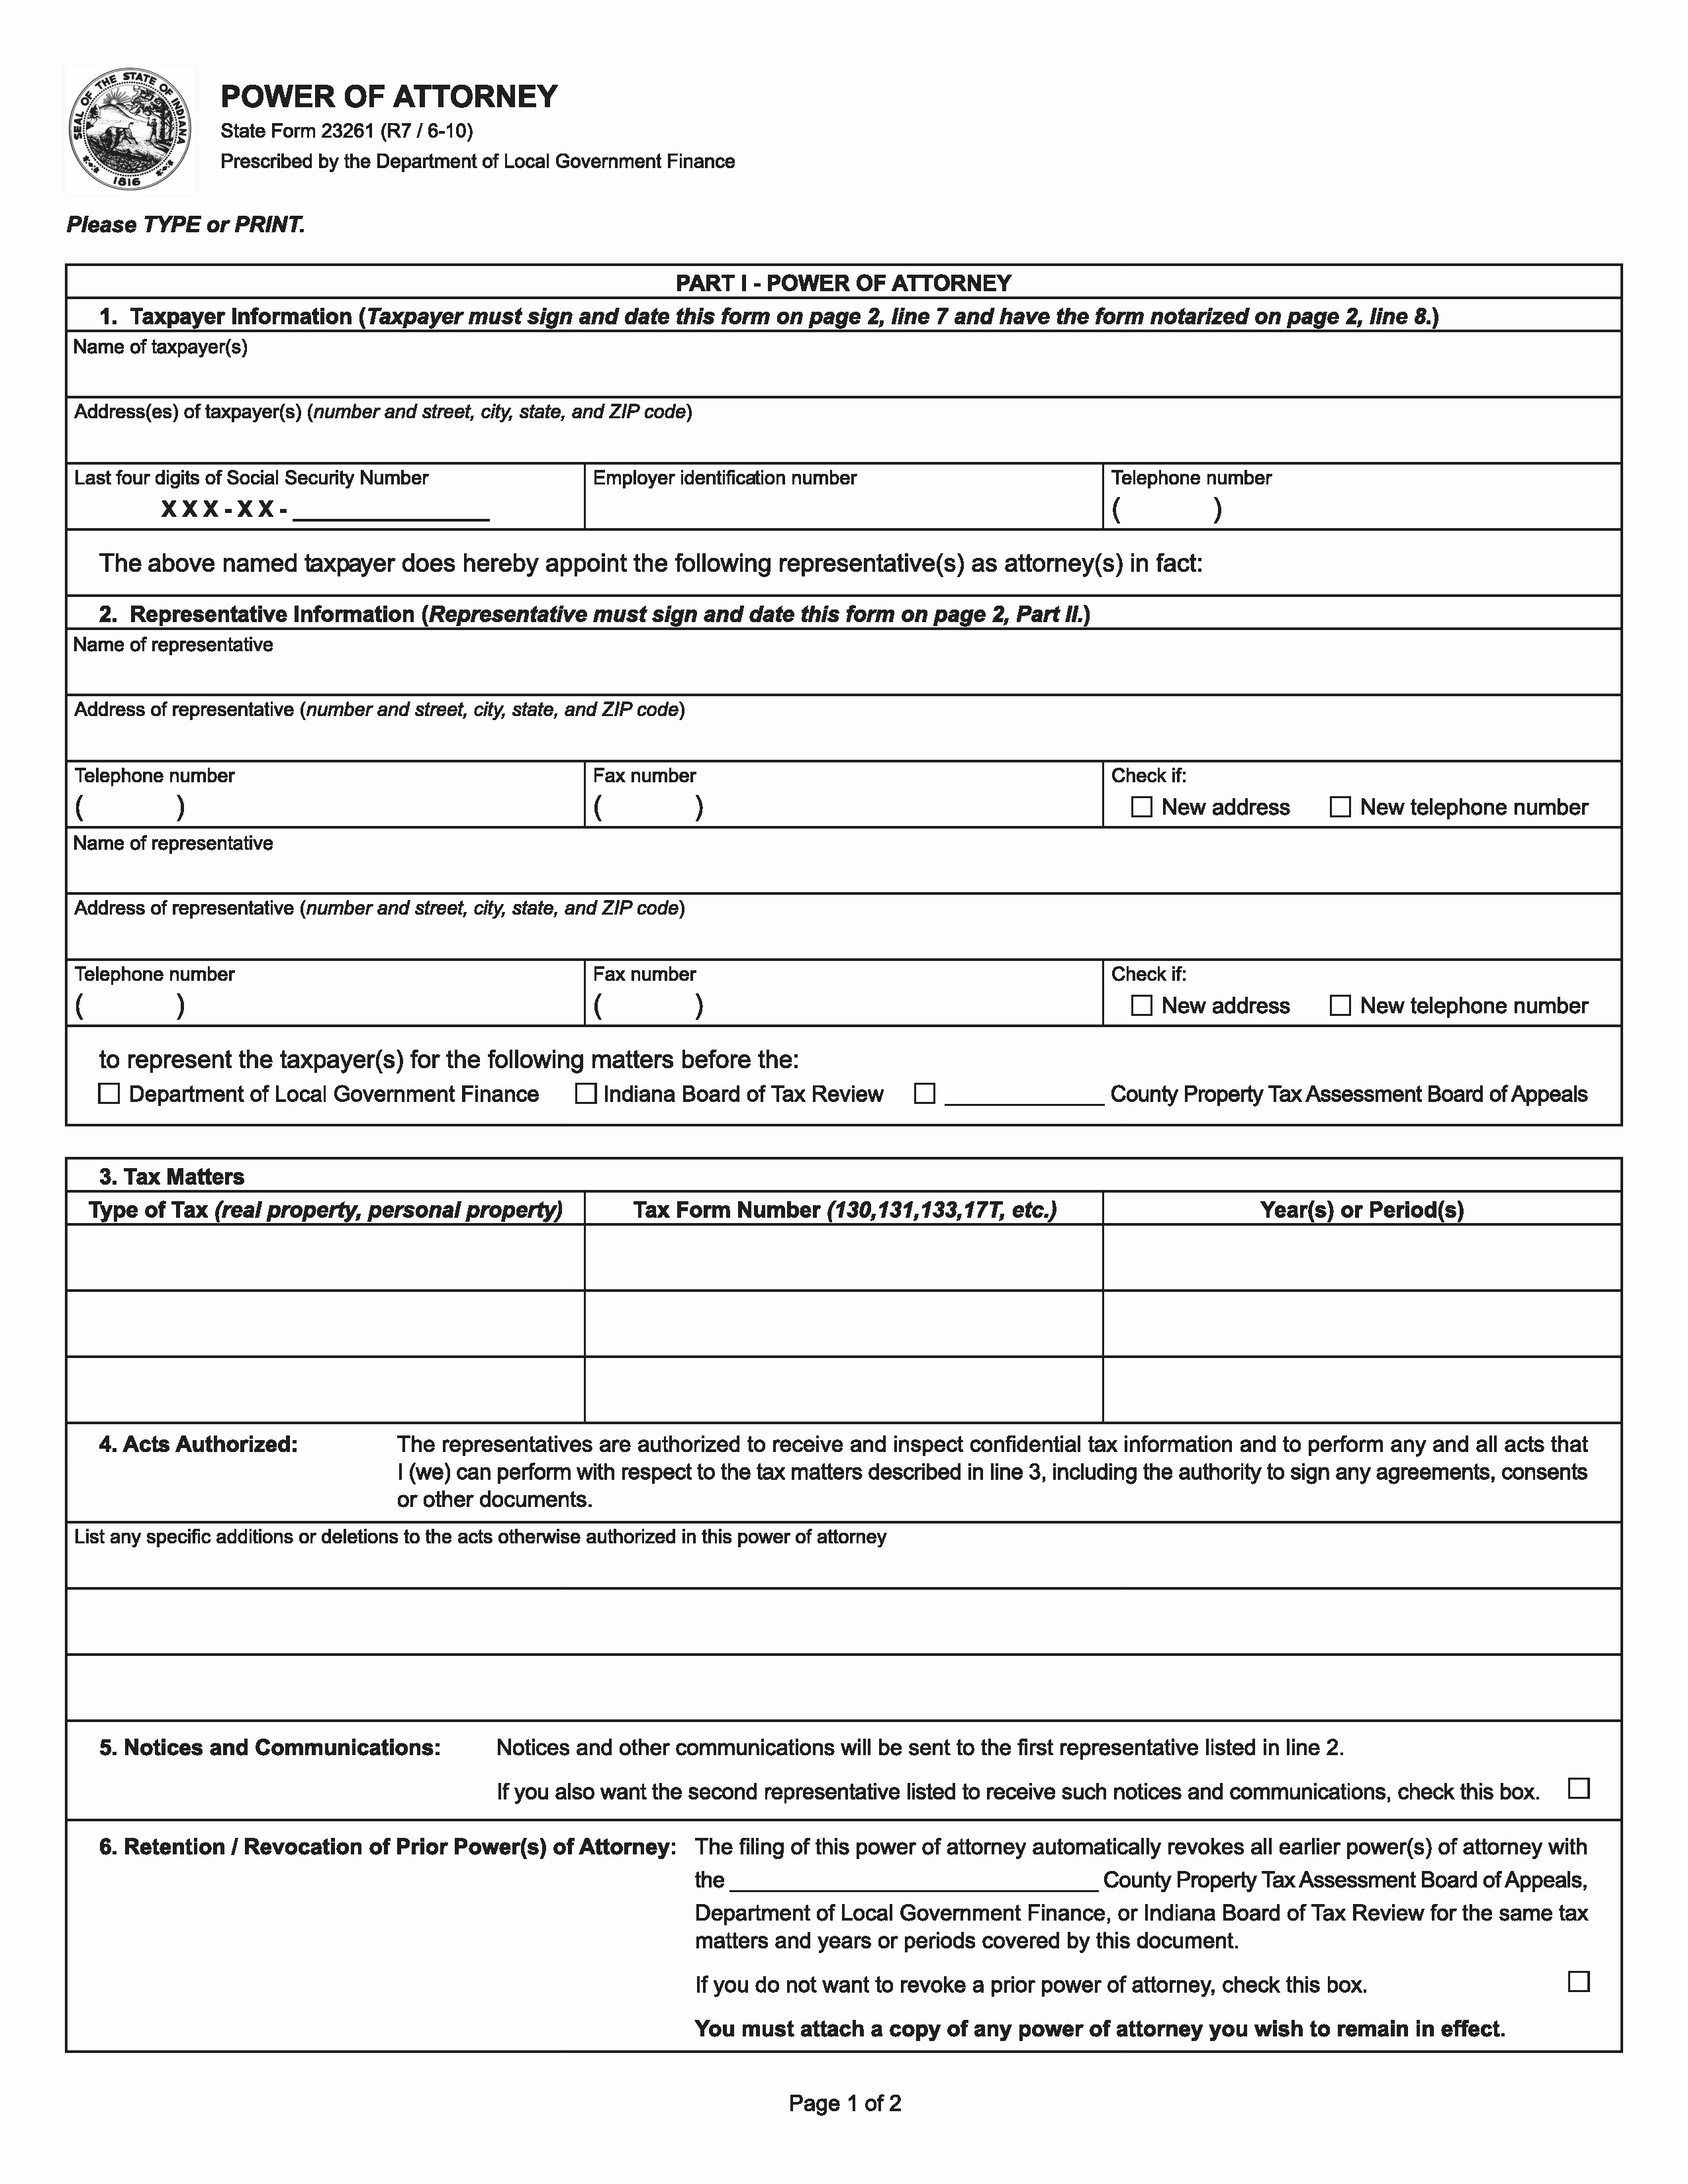 Free Indiana Tax Power Of Attorney Form 23261 R7 6 10 Adobe